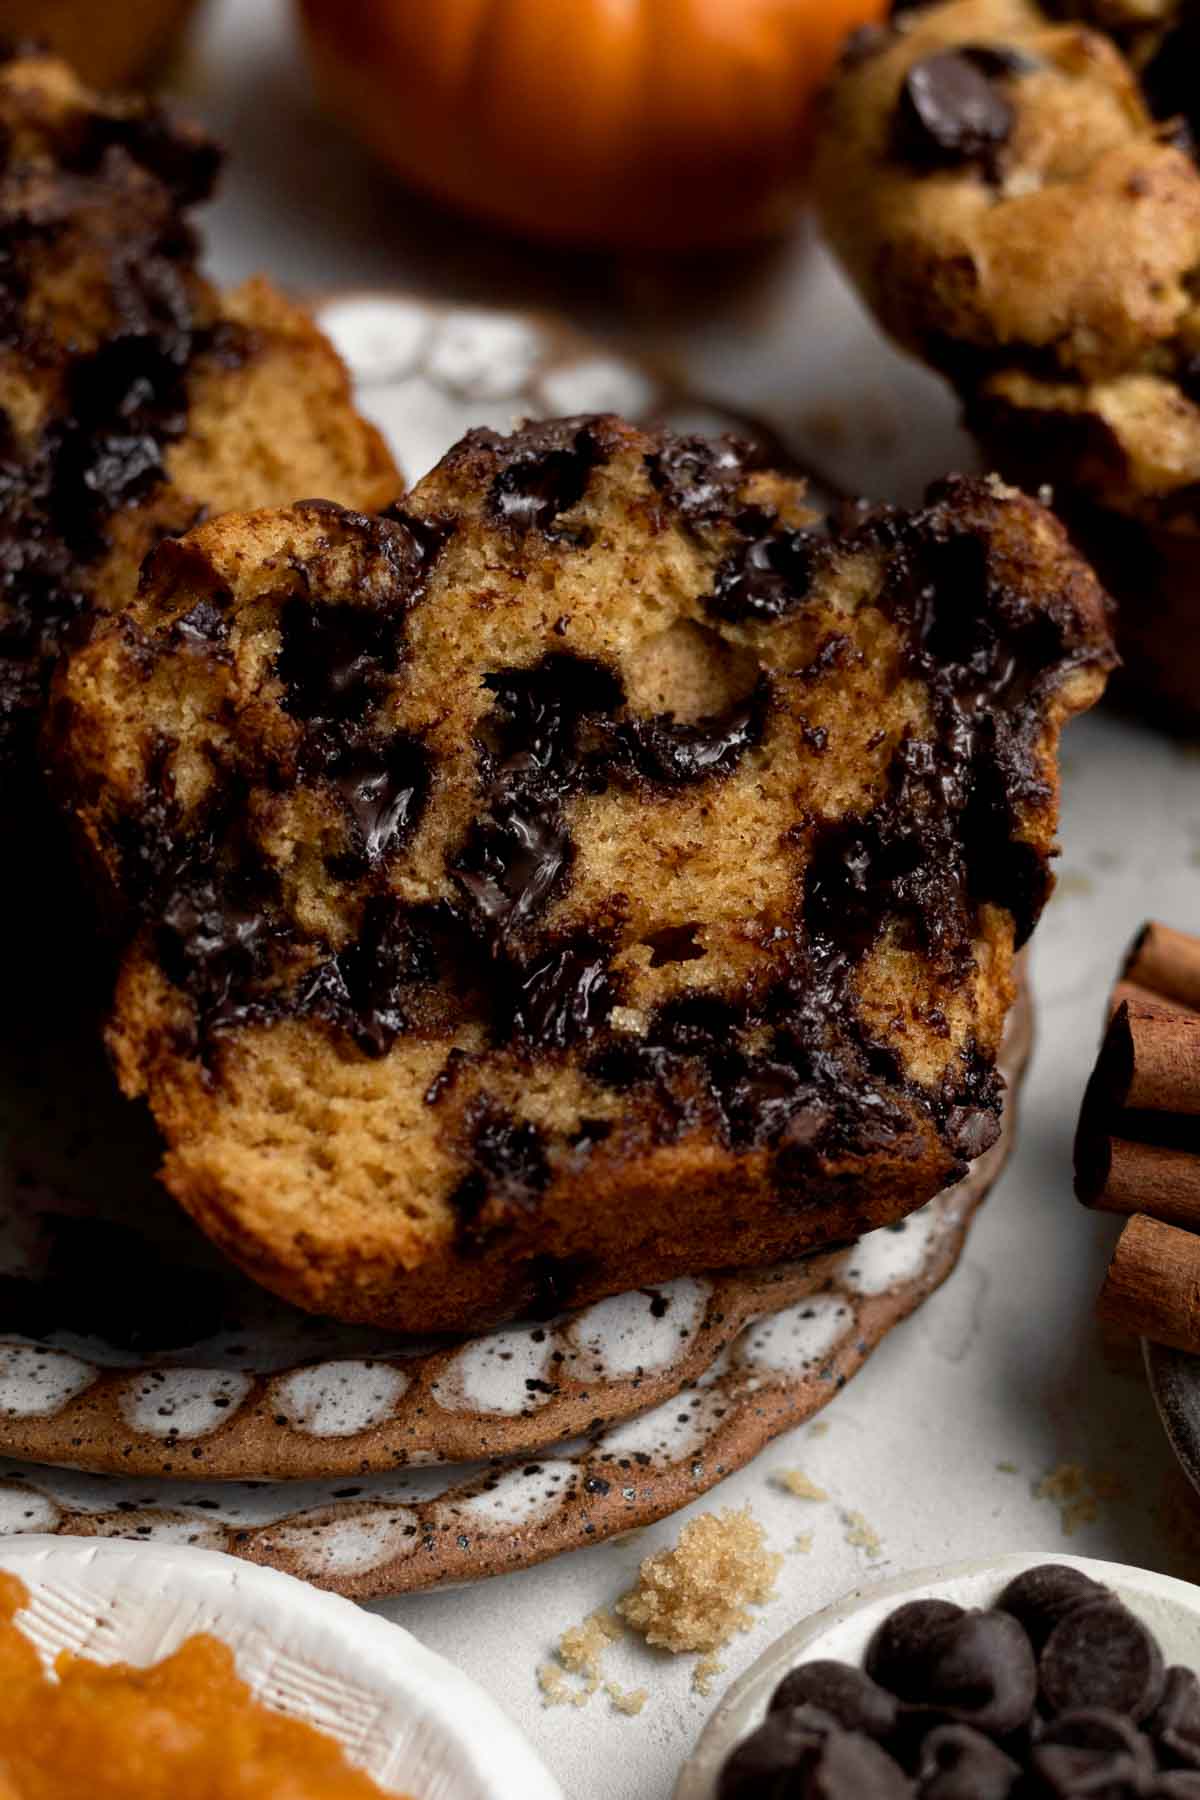 A sliced Gluten Free Pumpkin Muffin with its cozy pumpkin flavor and gooey chocolate chips.